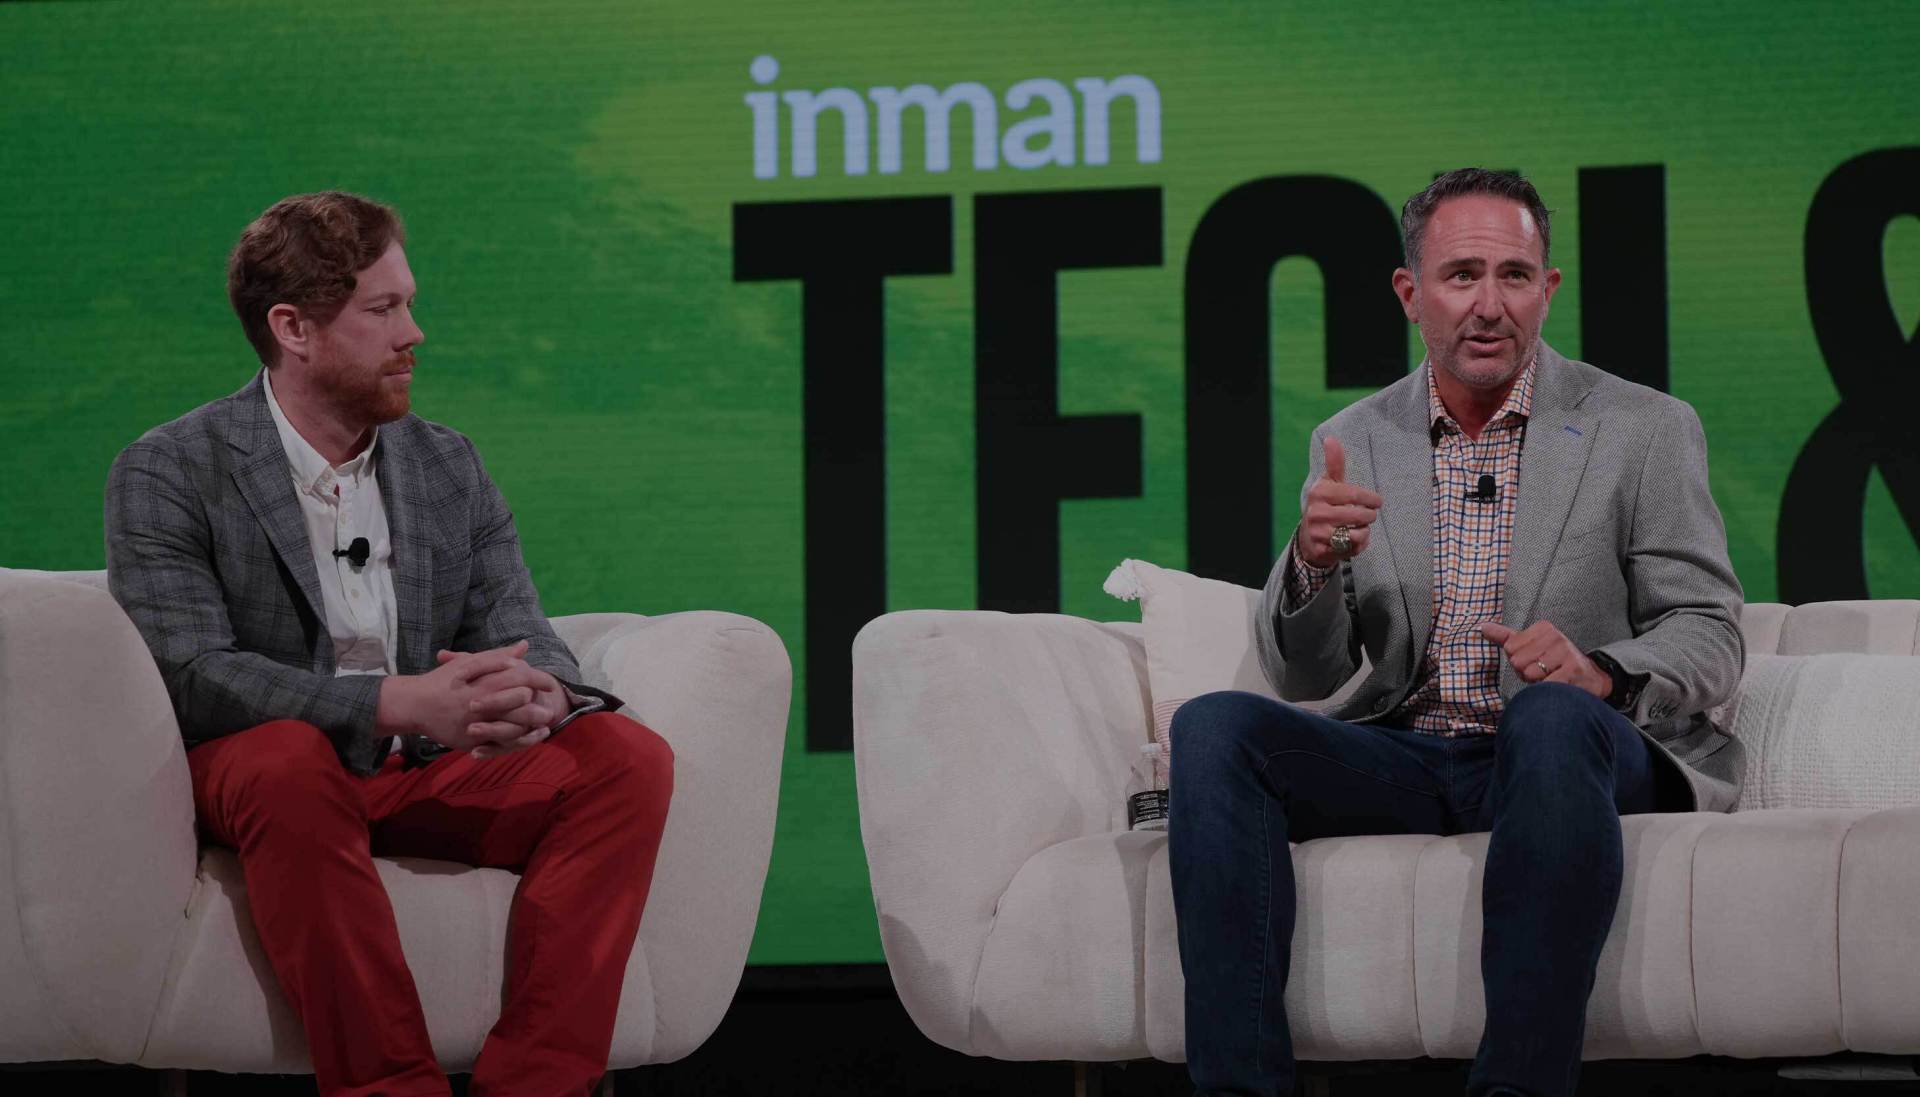 Doug Brien discusses trends in the single-family rental market at Inman Connect in Las Vegas with Jim Dalrymple, an Inman reporter.
